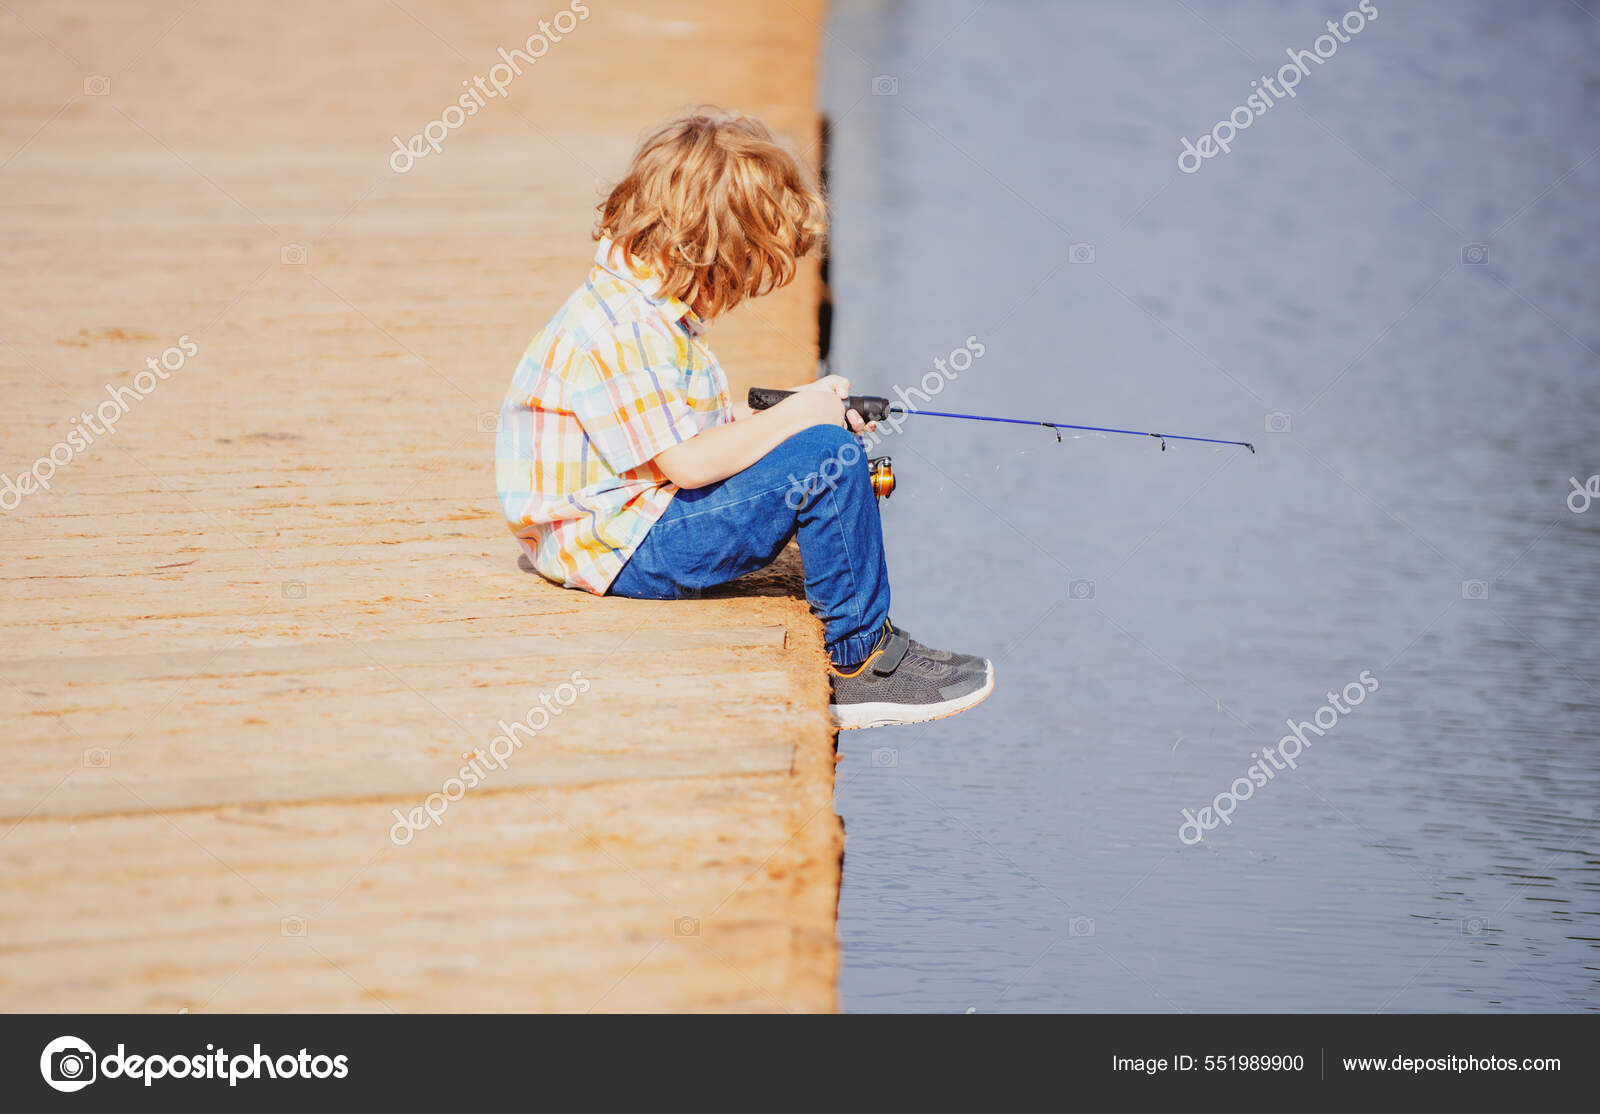 Fishing concept. Child fishing on the lake. Young fisher. Boy with